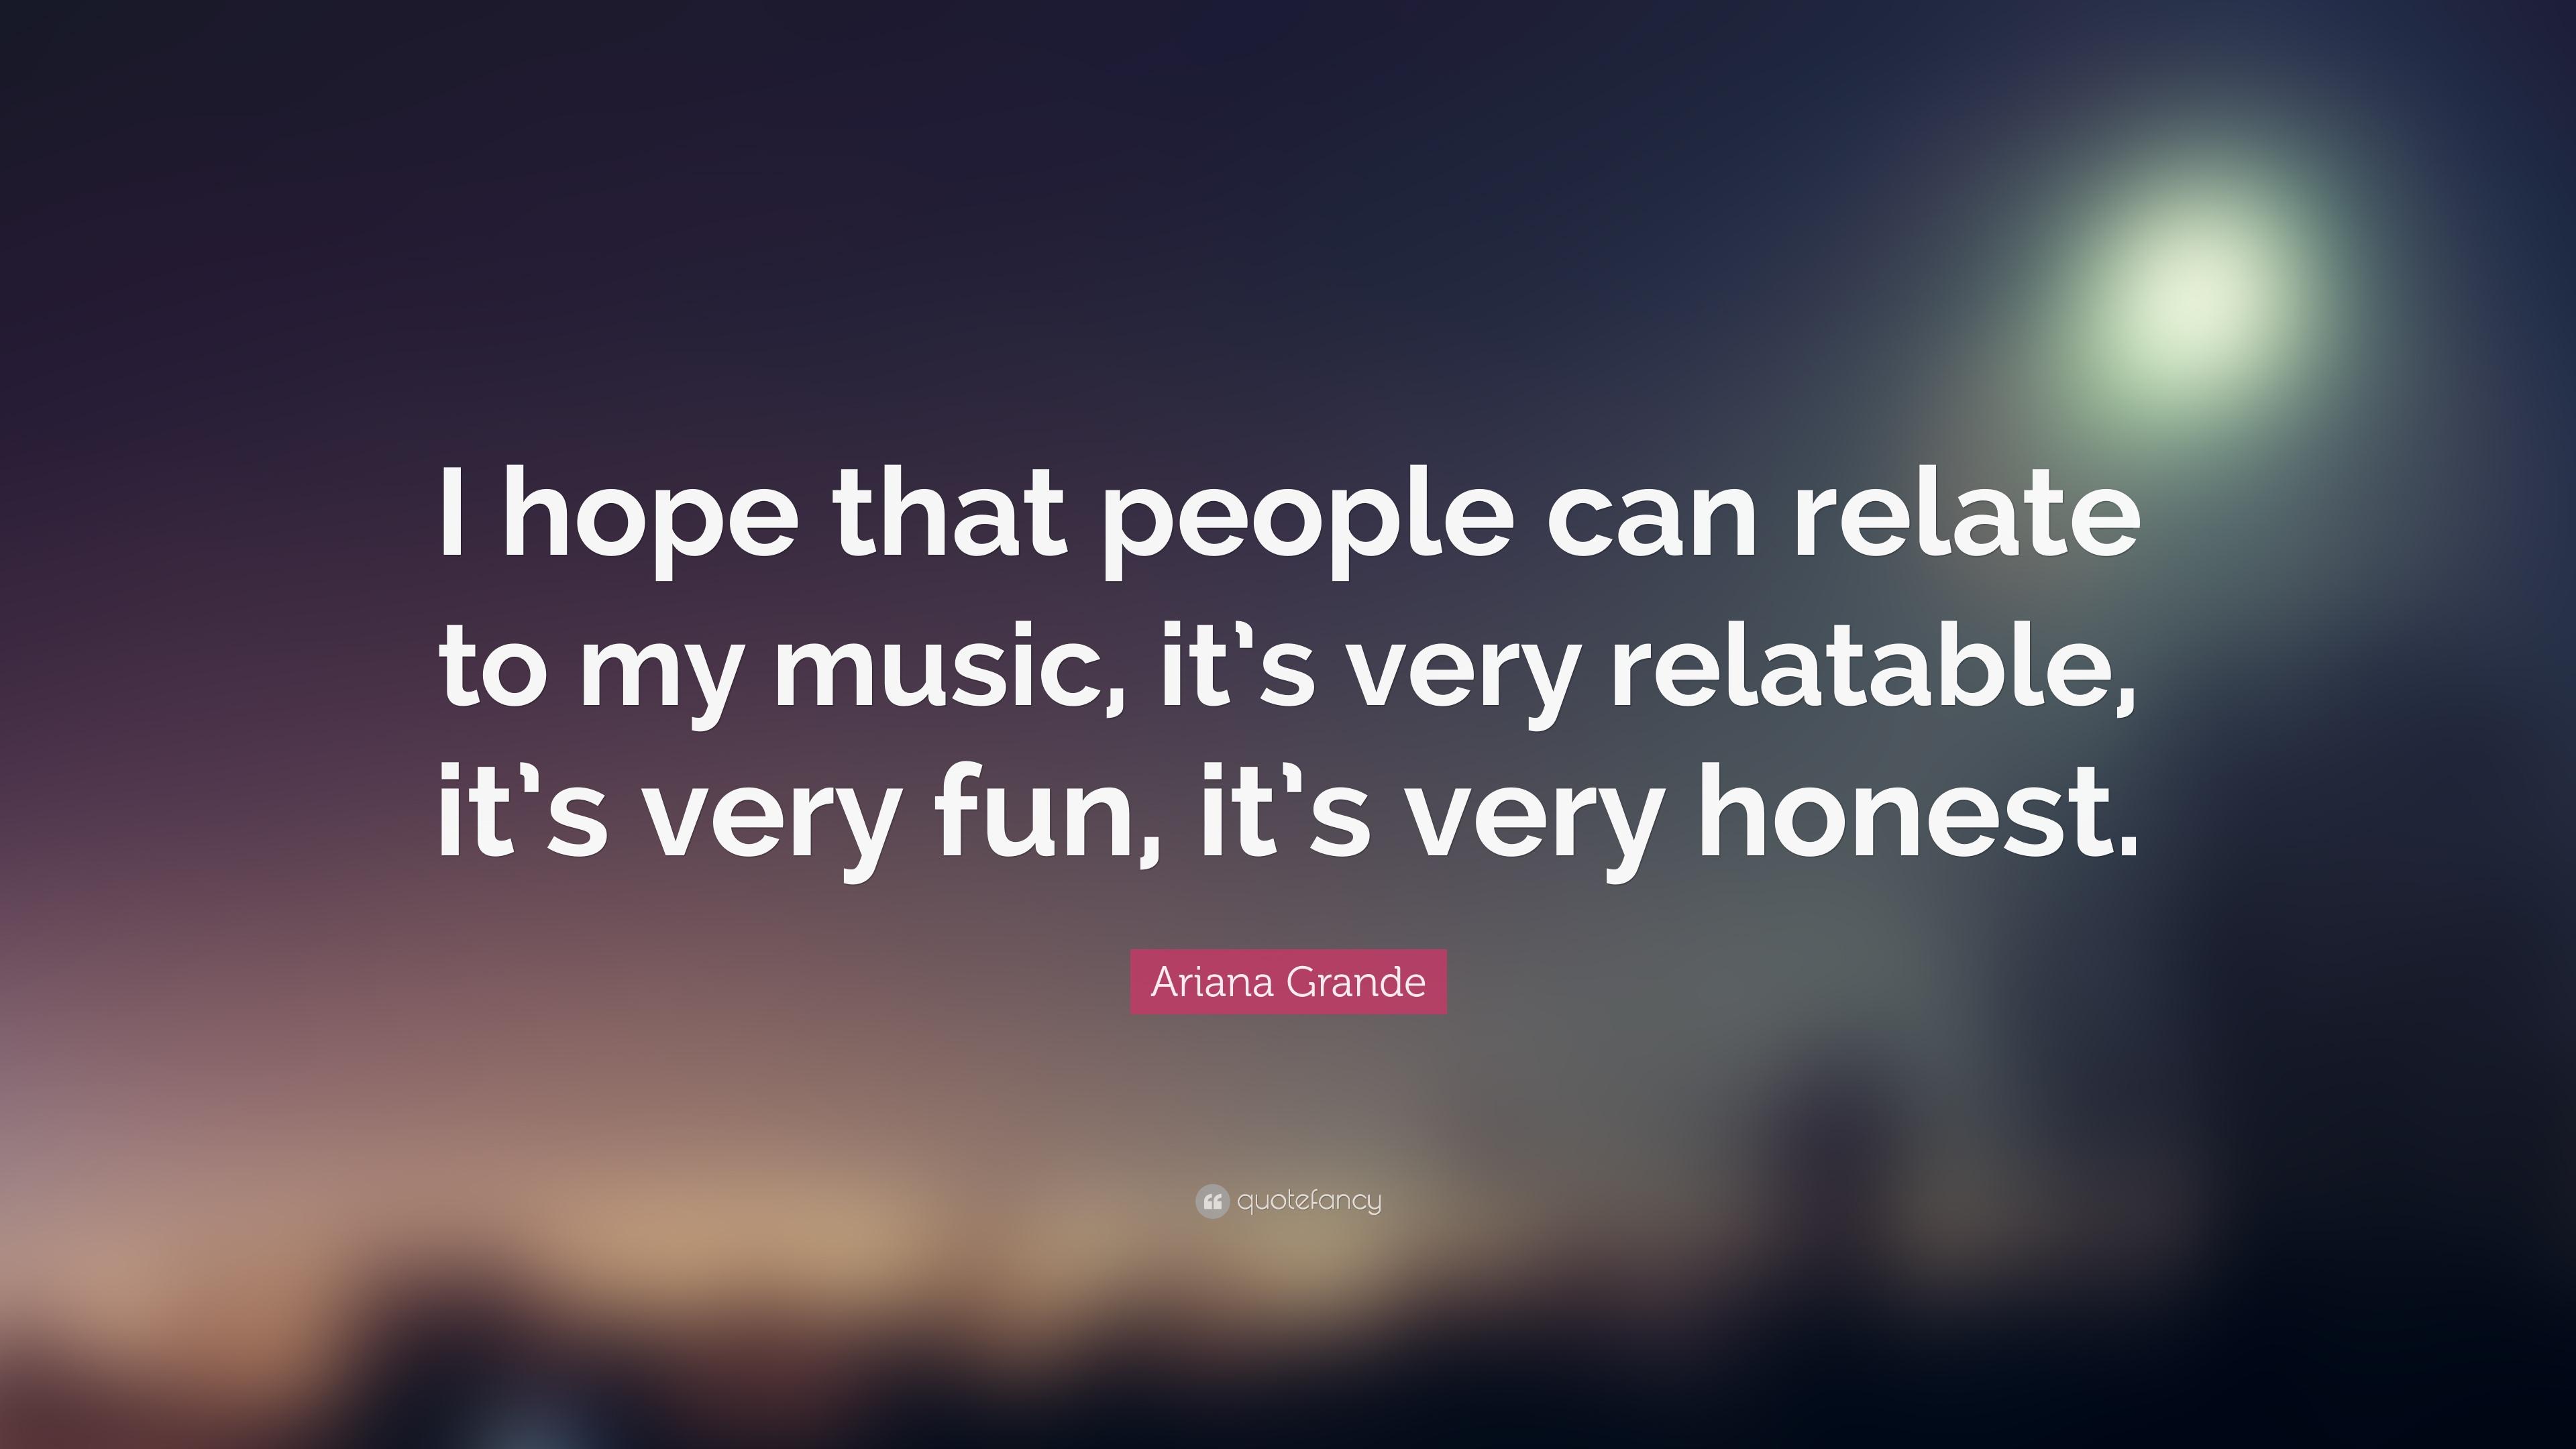 Ariana Grande Quote: “I hope that people can relate to my